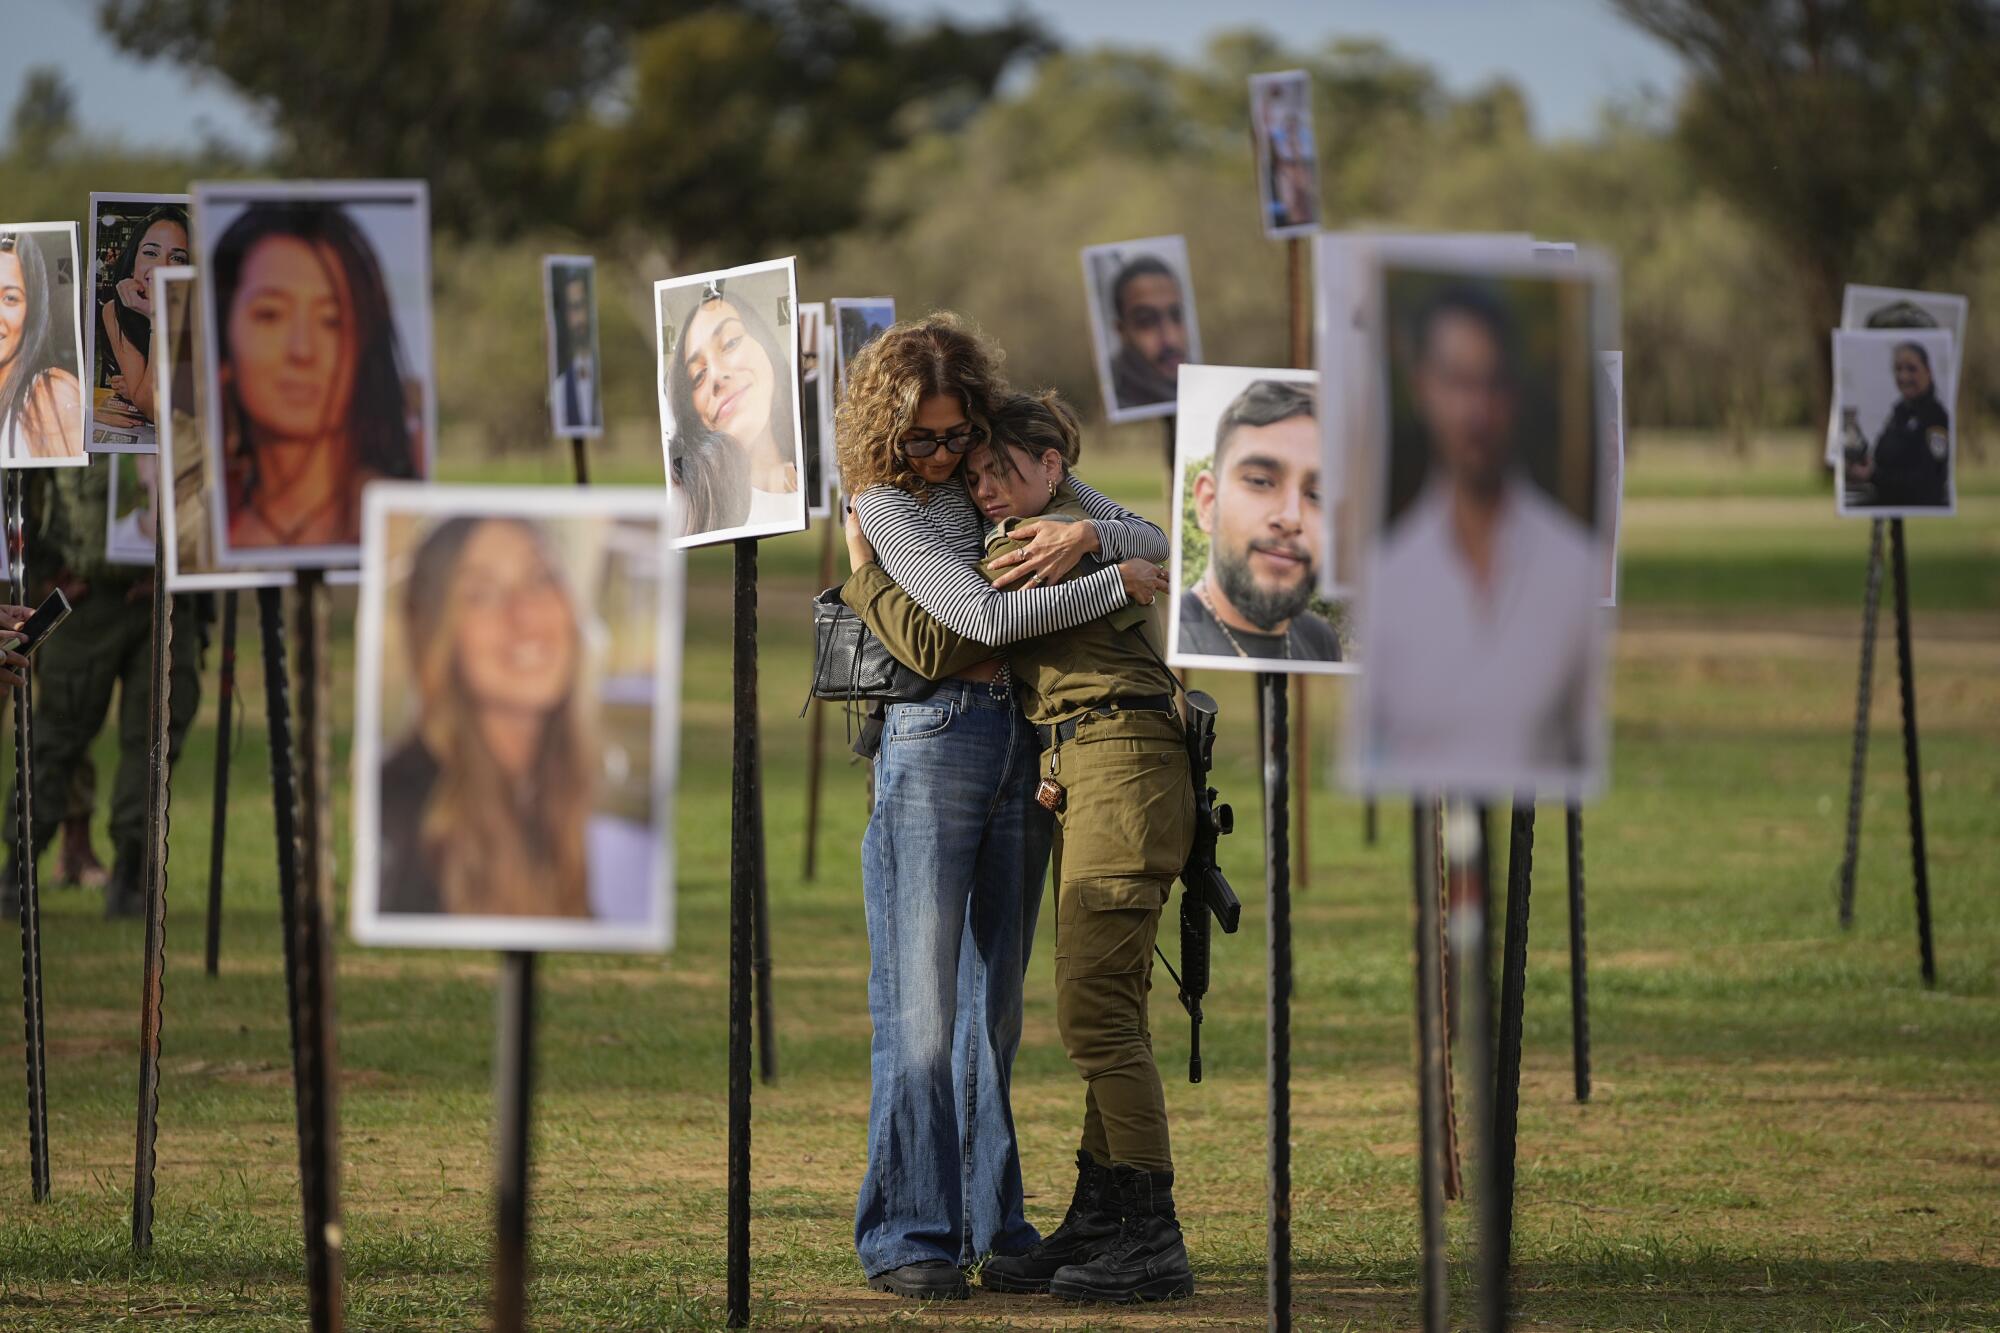 Two people, one in military uniform and armed, embrace amid photos of people elevated on poles